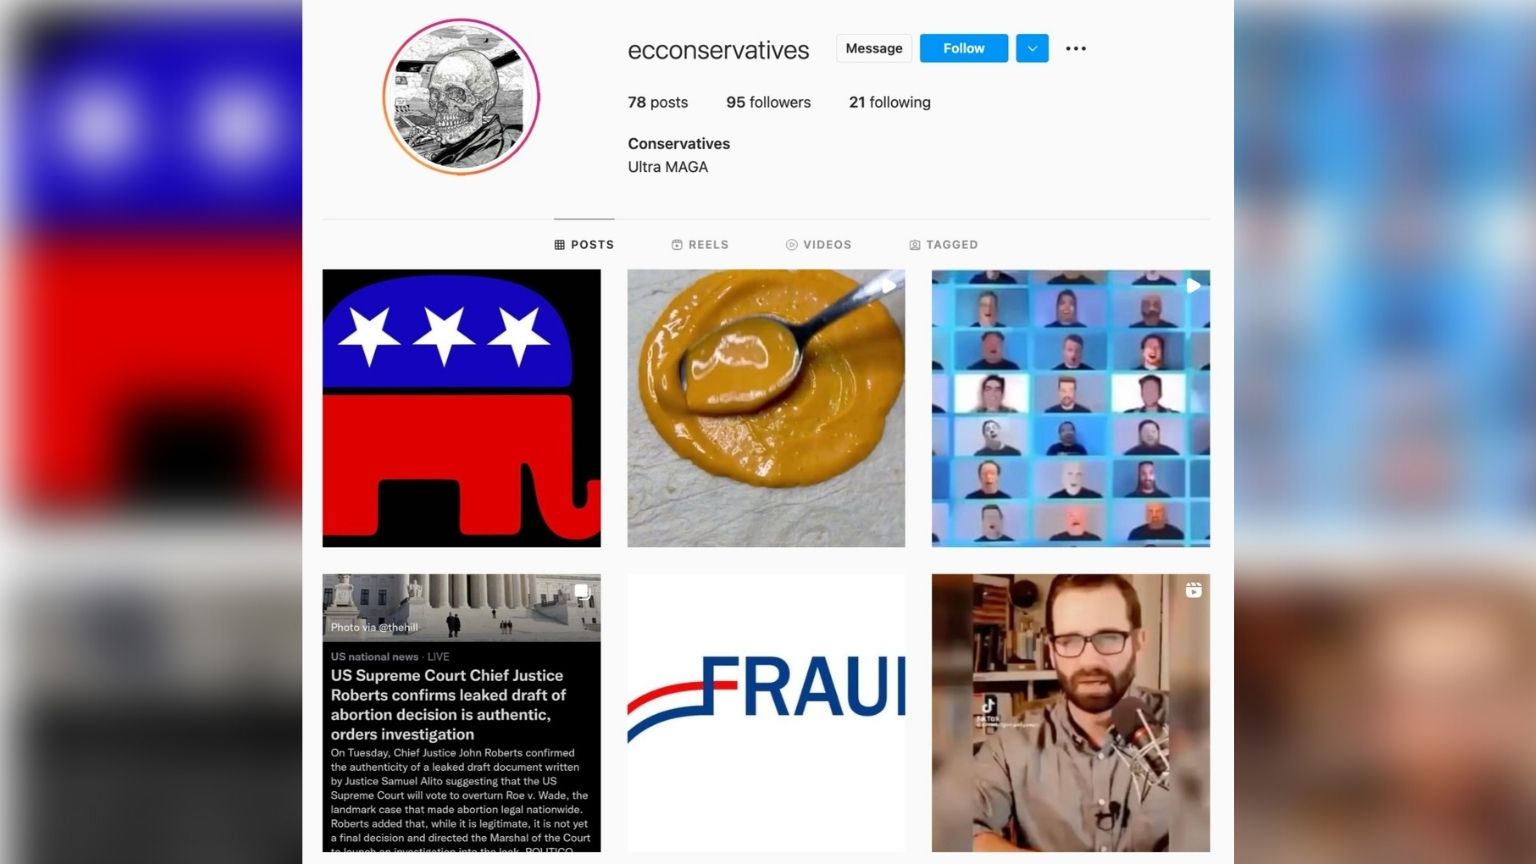 Eckerd College government refuses to recognize Republican group unless it censors its social media posts